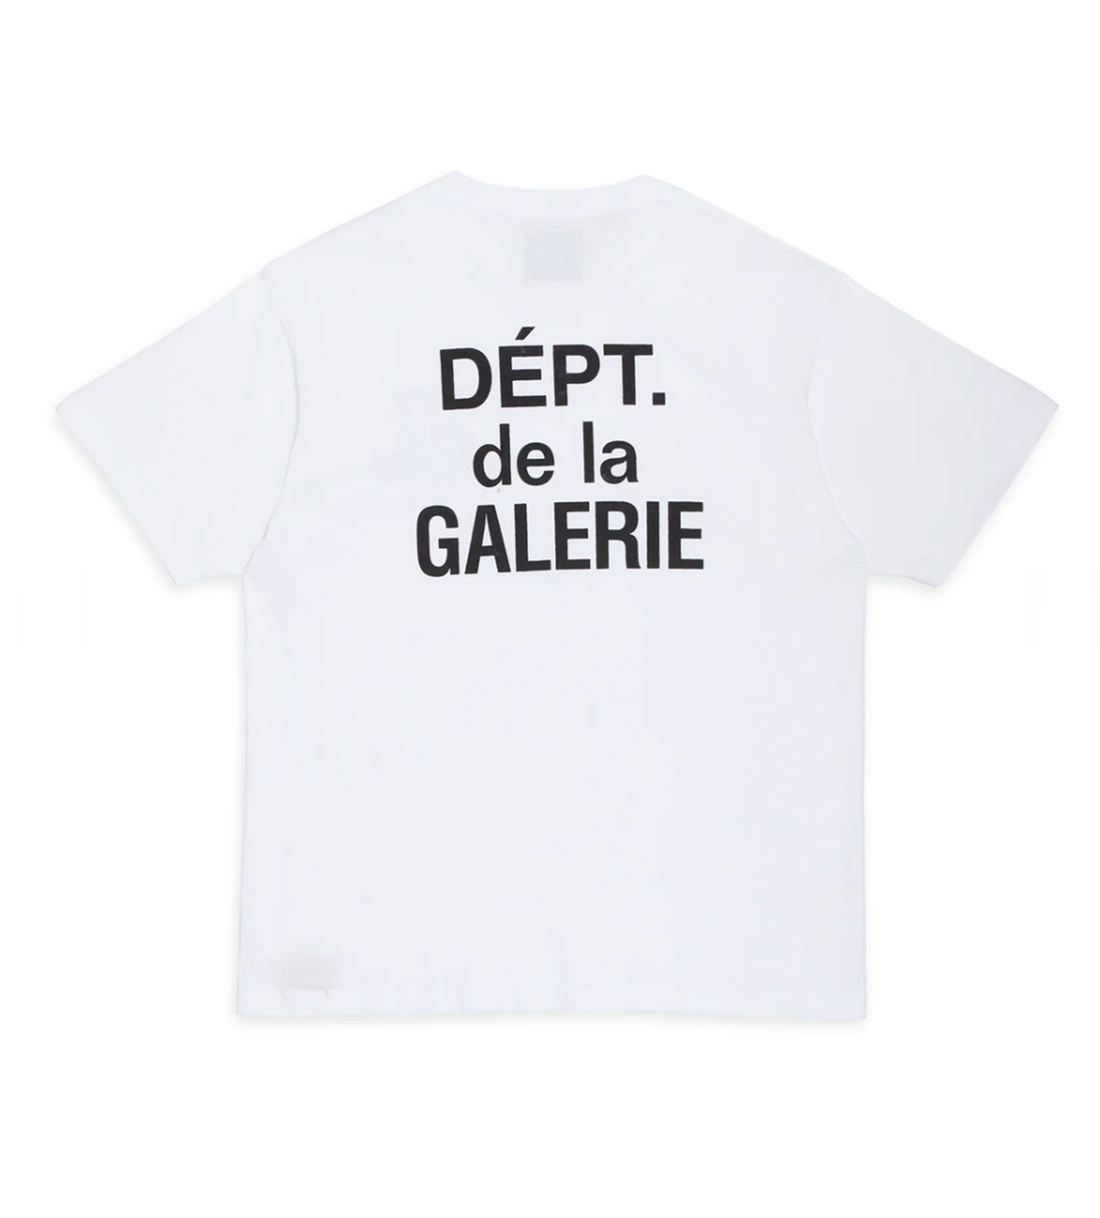 Gallery Dept French White Tee